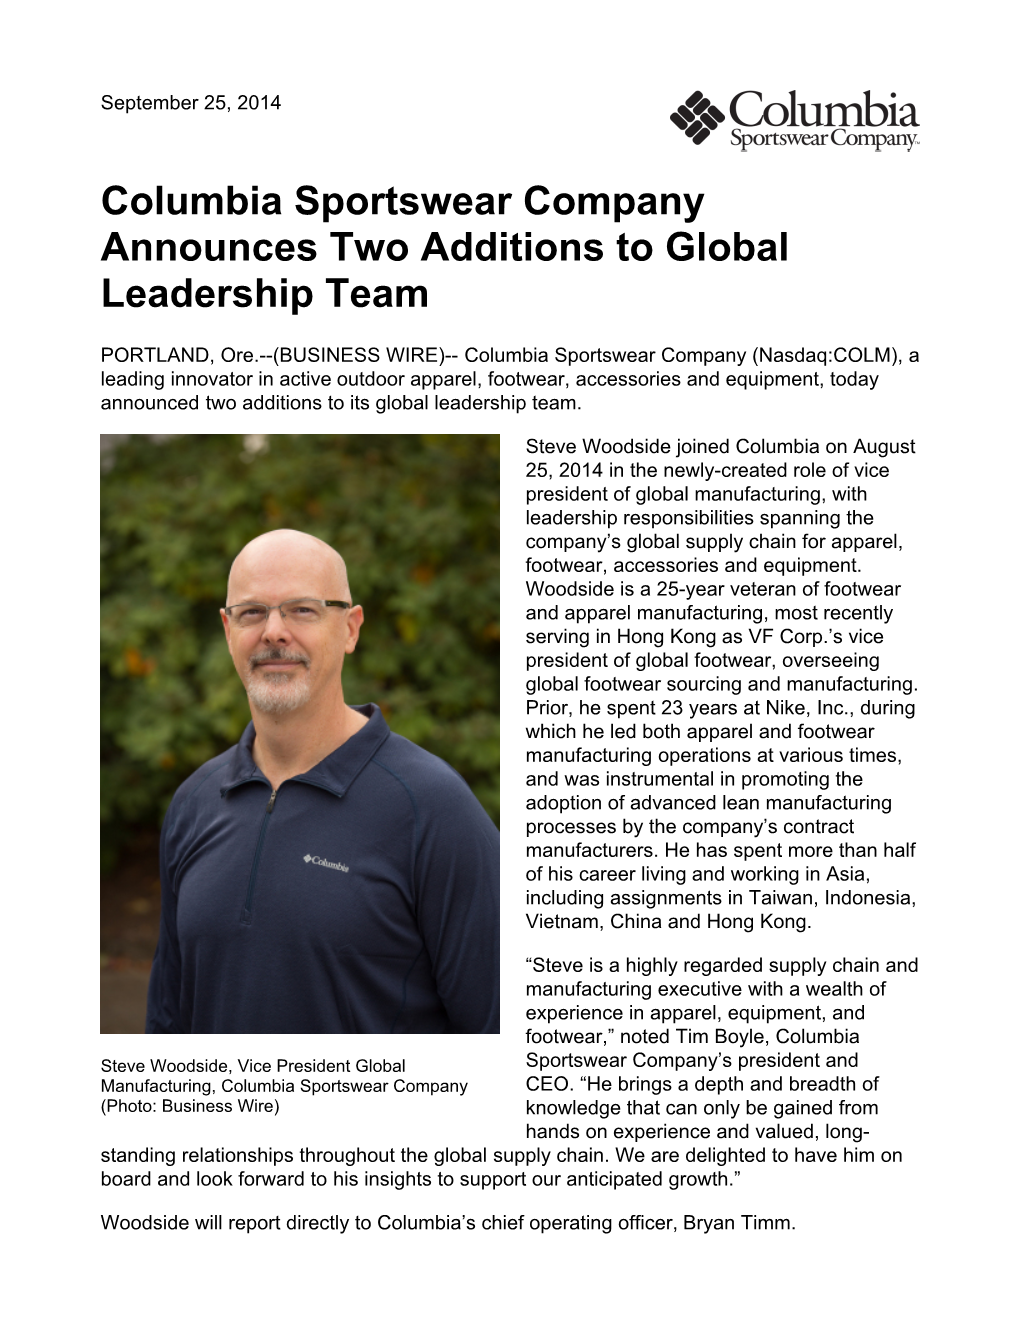 Columbia Sportswear Company Announces Two Additions to Global Leadership Team